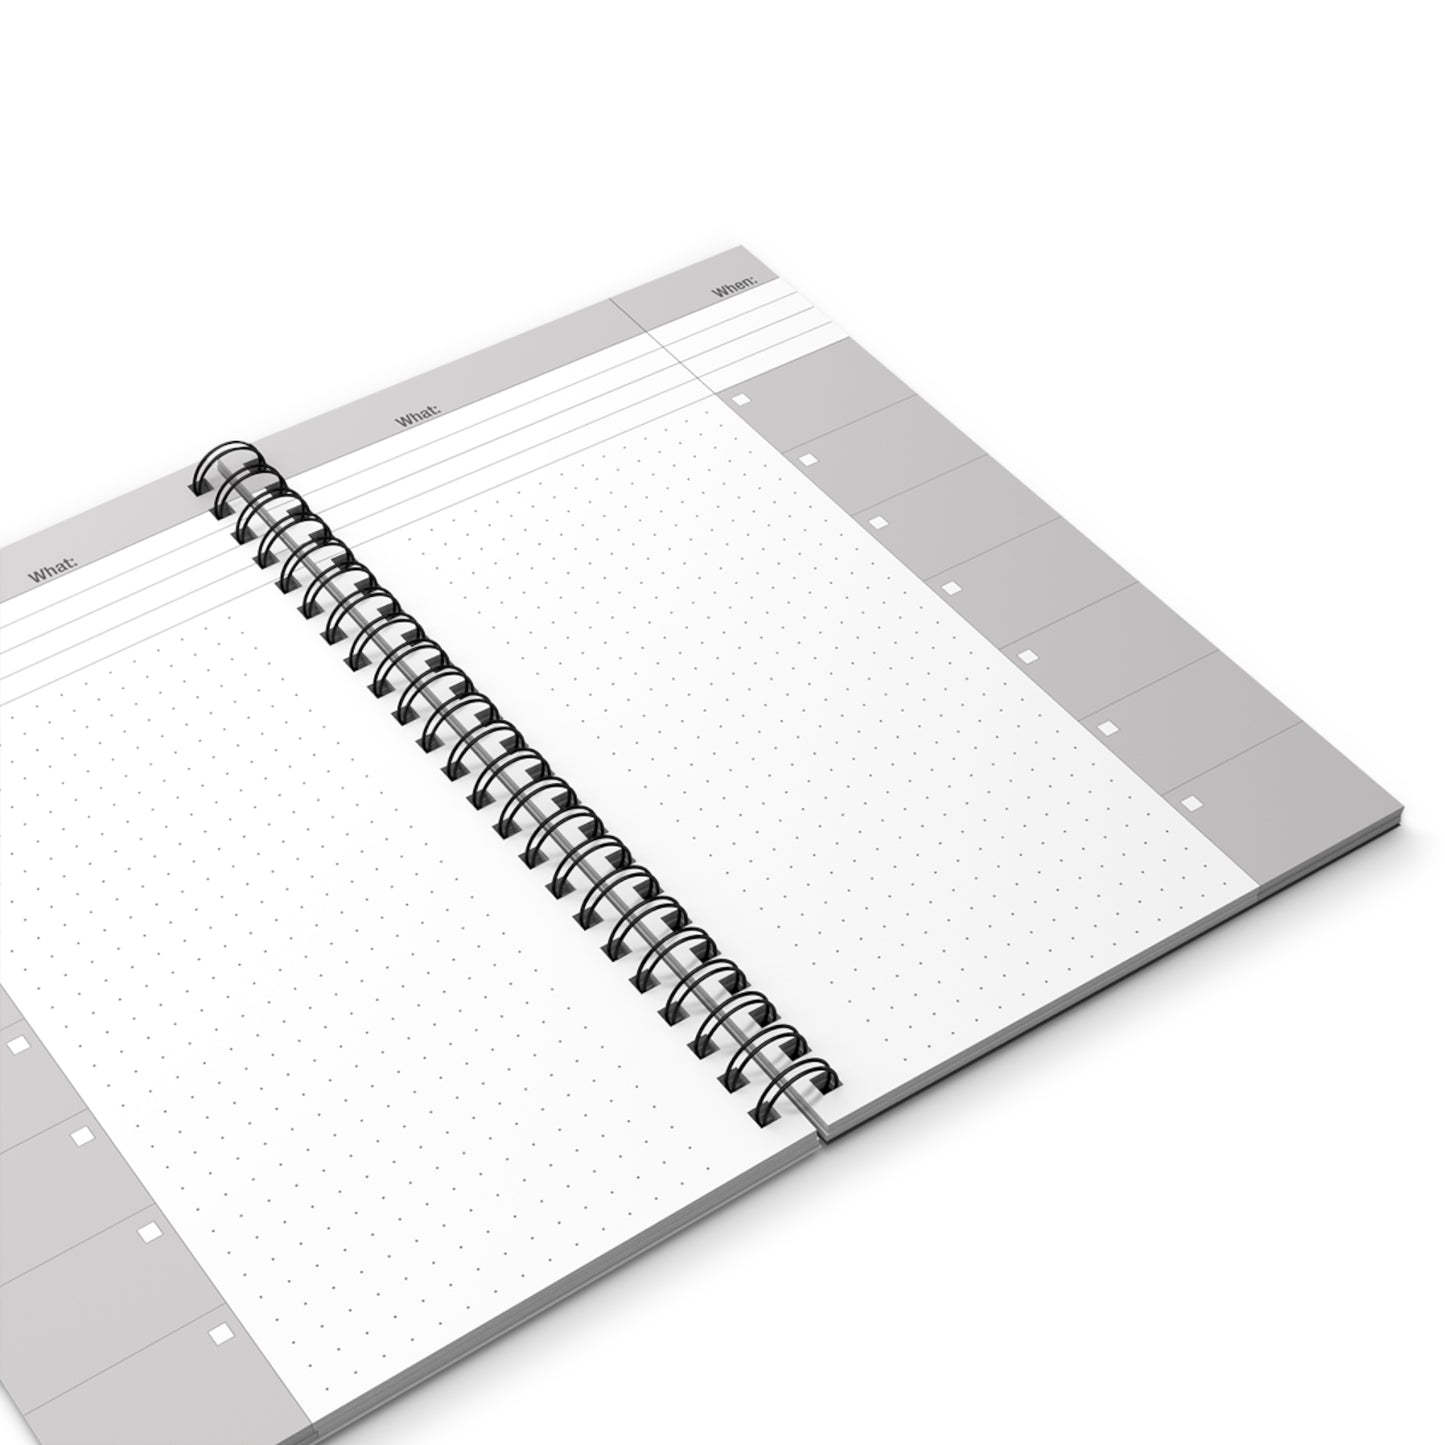 LifePoint / Sermon Notebook / Lined, Blank, Dot OR Task - YOU Choose!